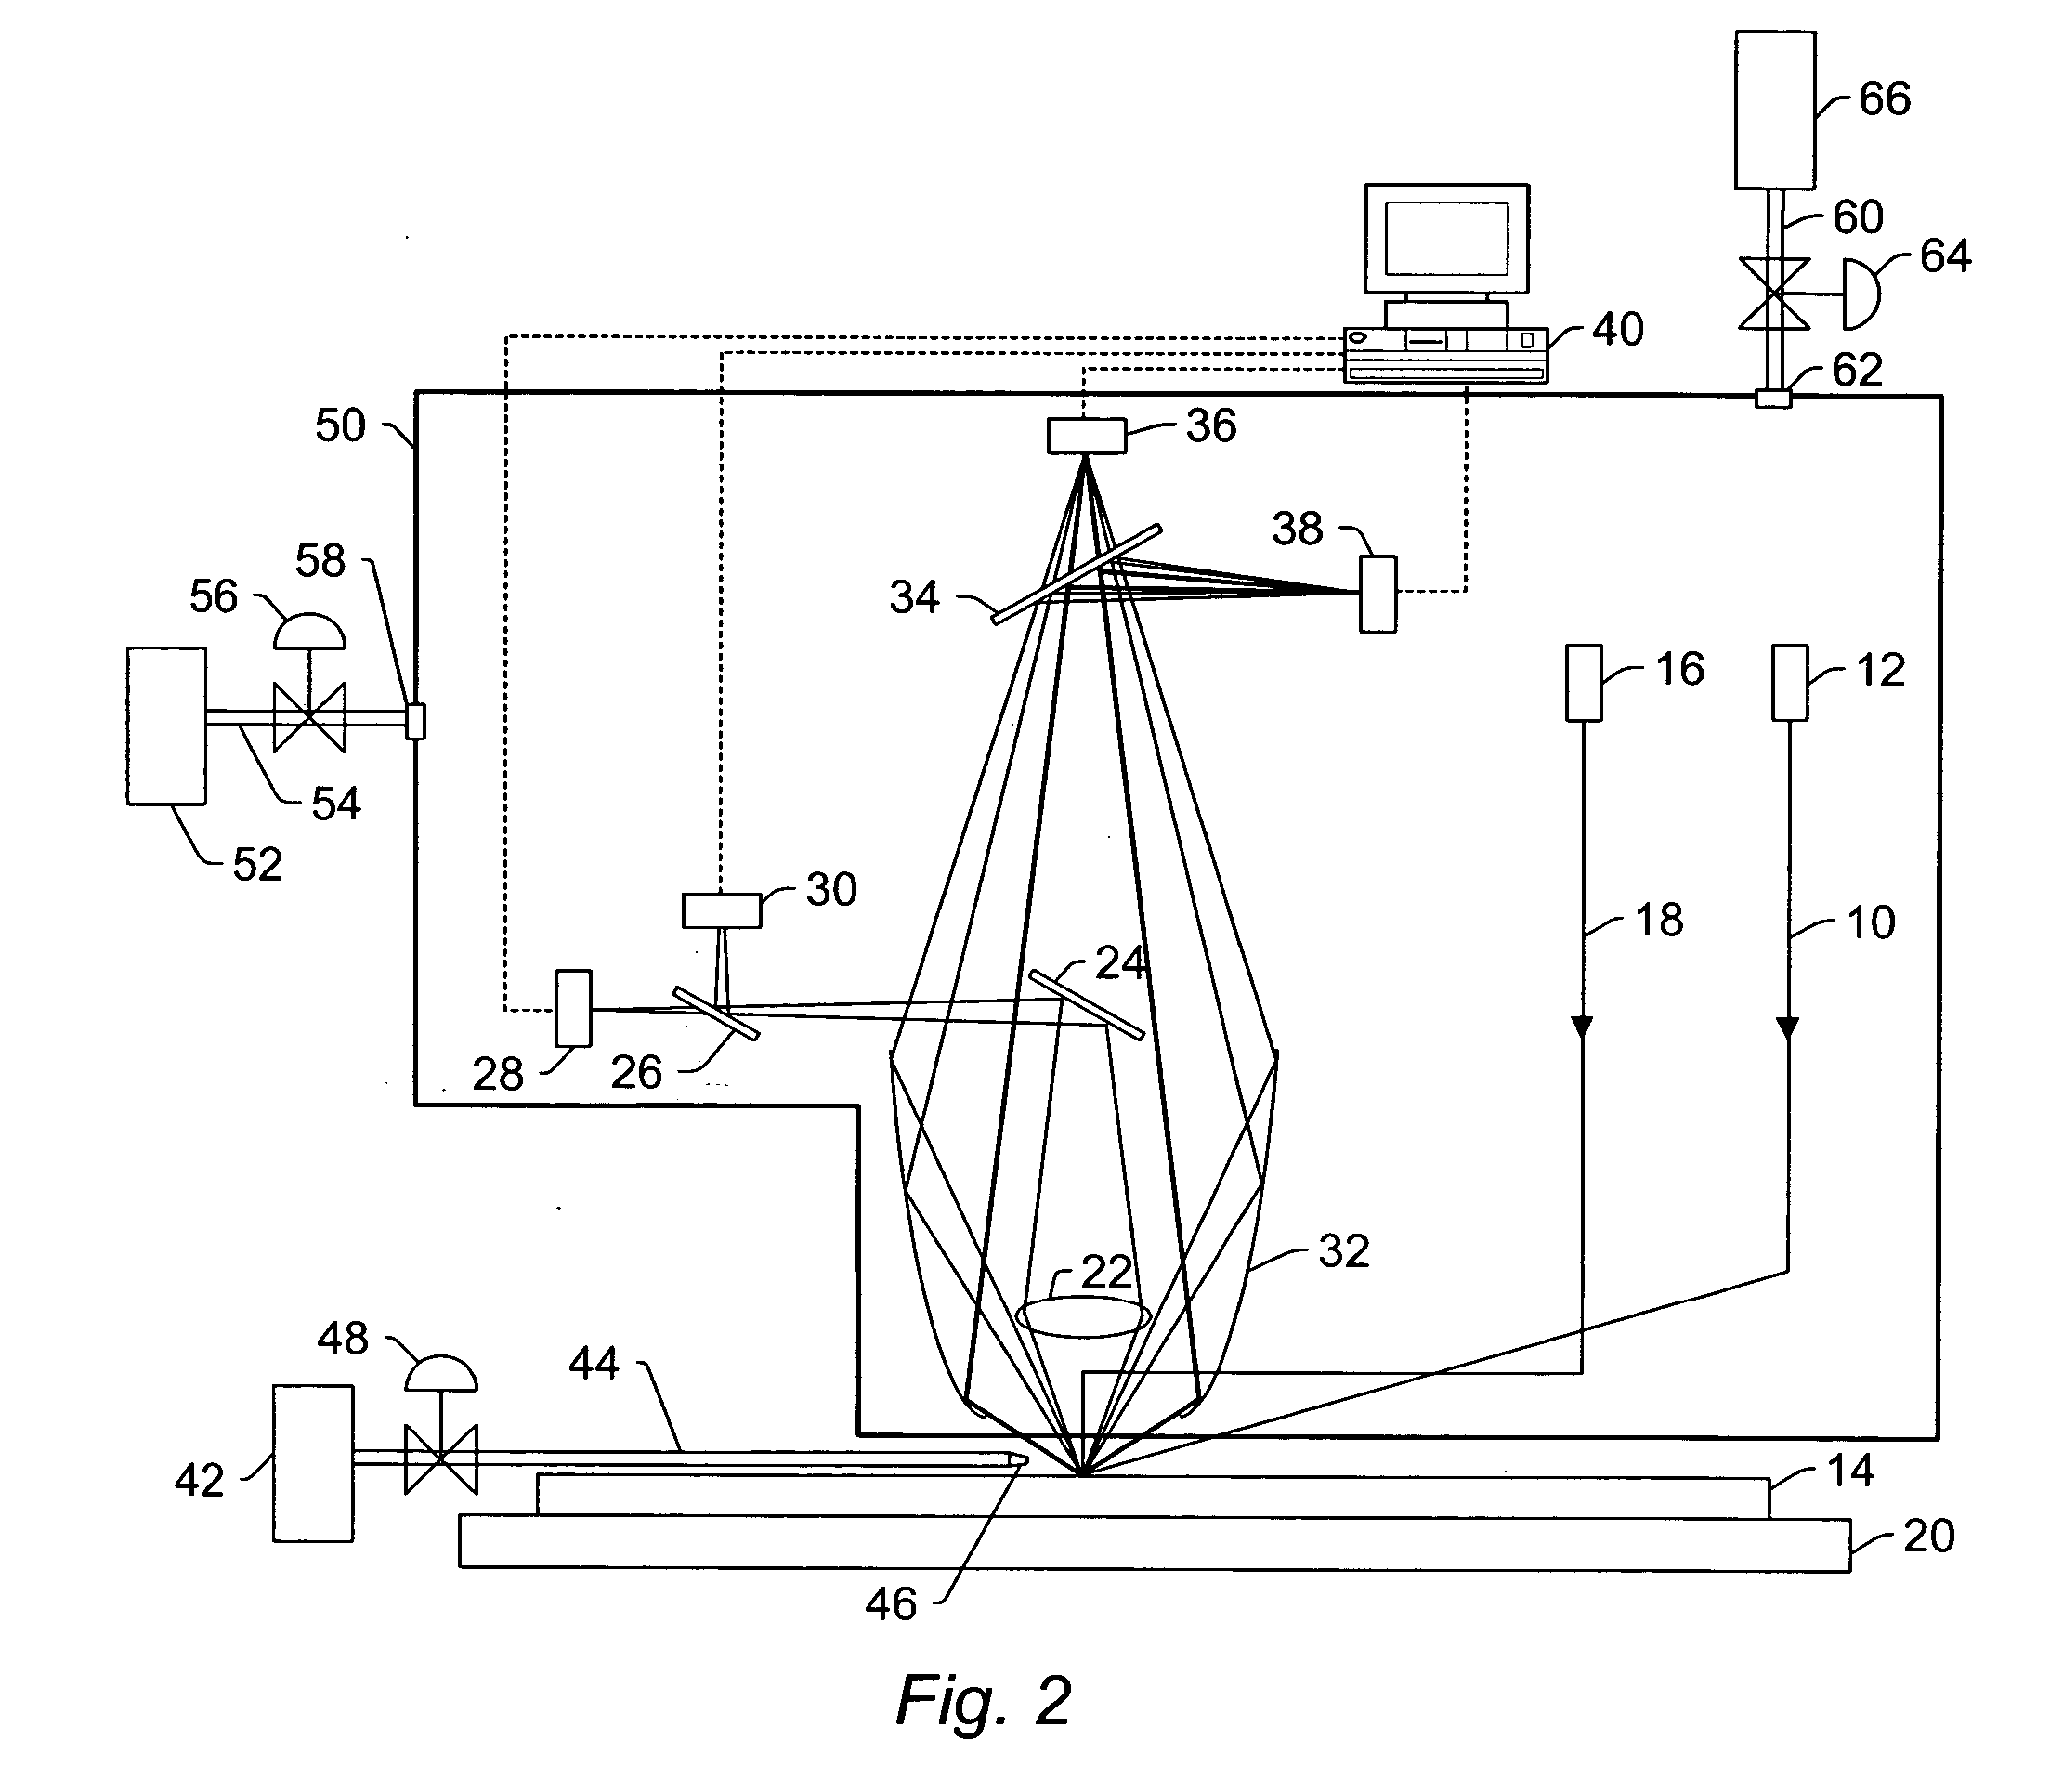 Systems and methods for inspecting a wafer with increased sensitivity